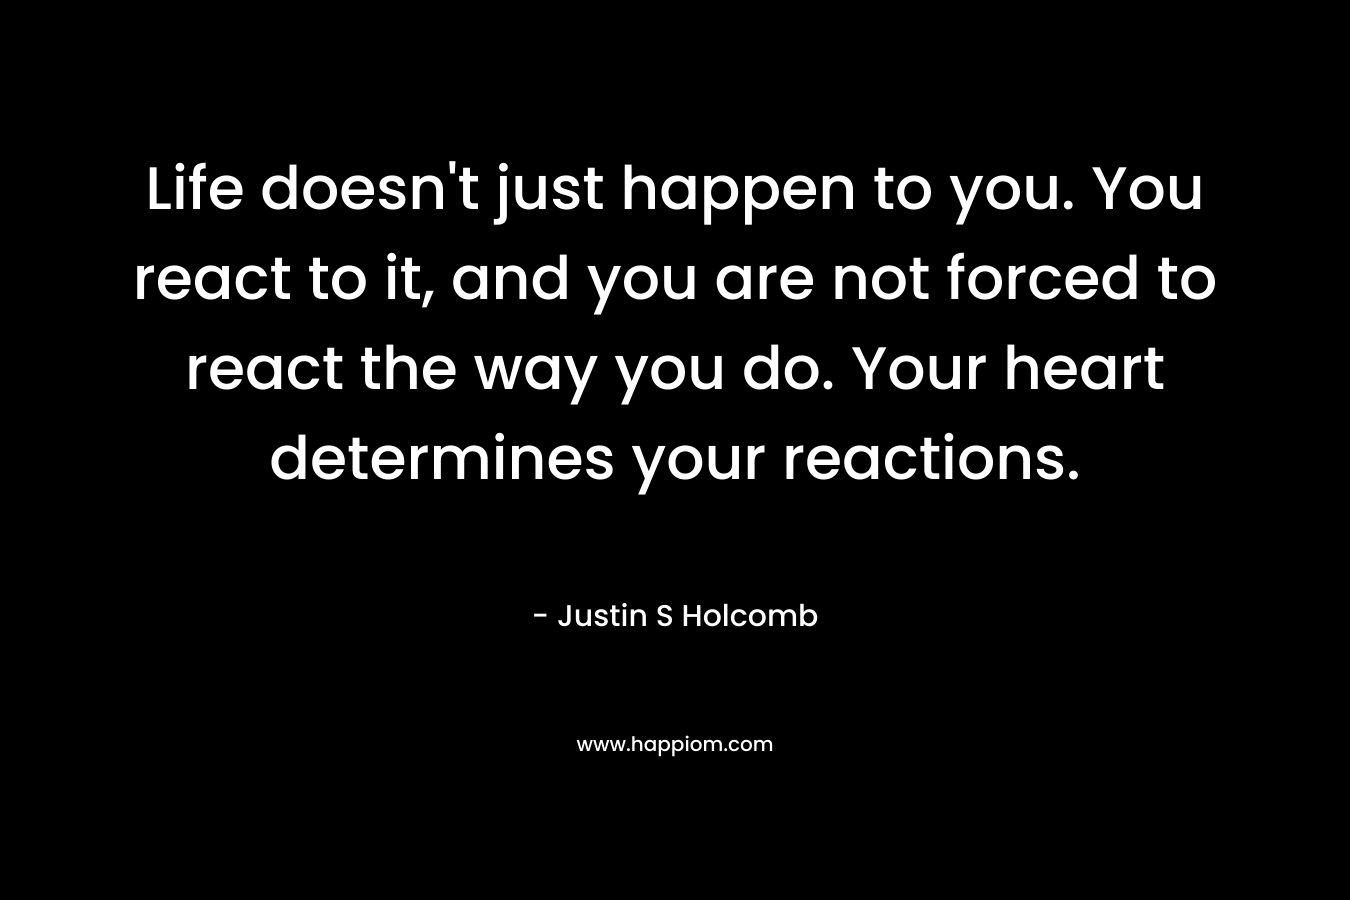 Life doesn't just happen to you. You react to it, and you are not forced to react the way you do. Your heart determines your reactions.